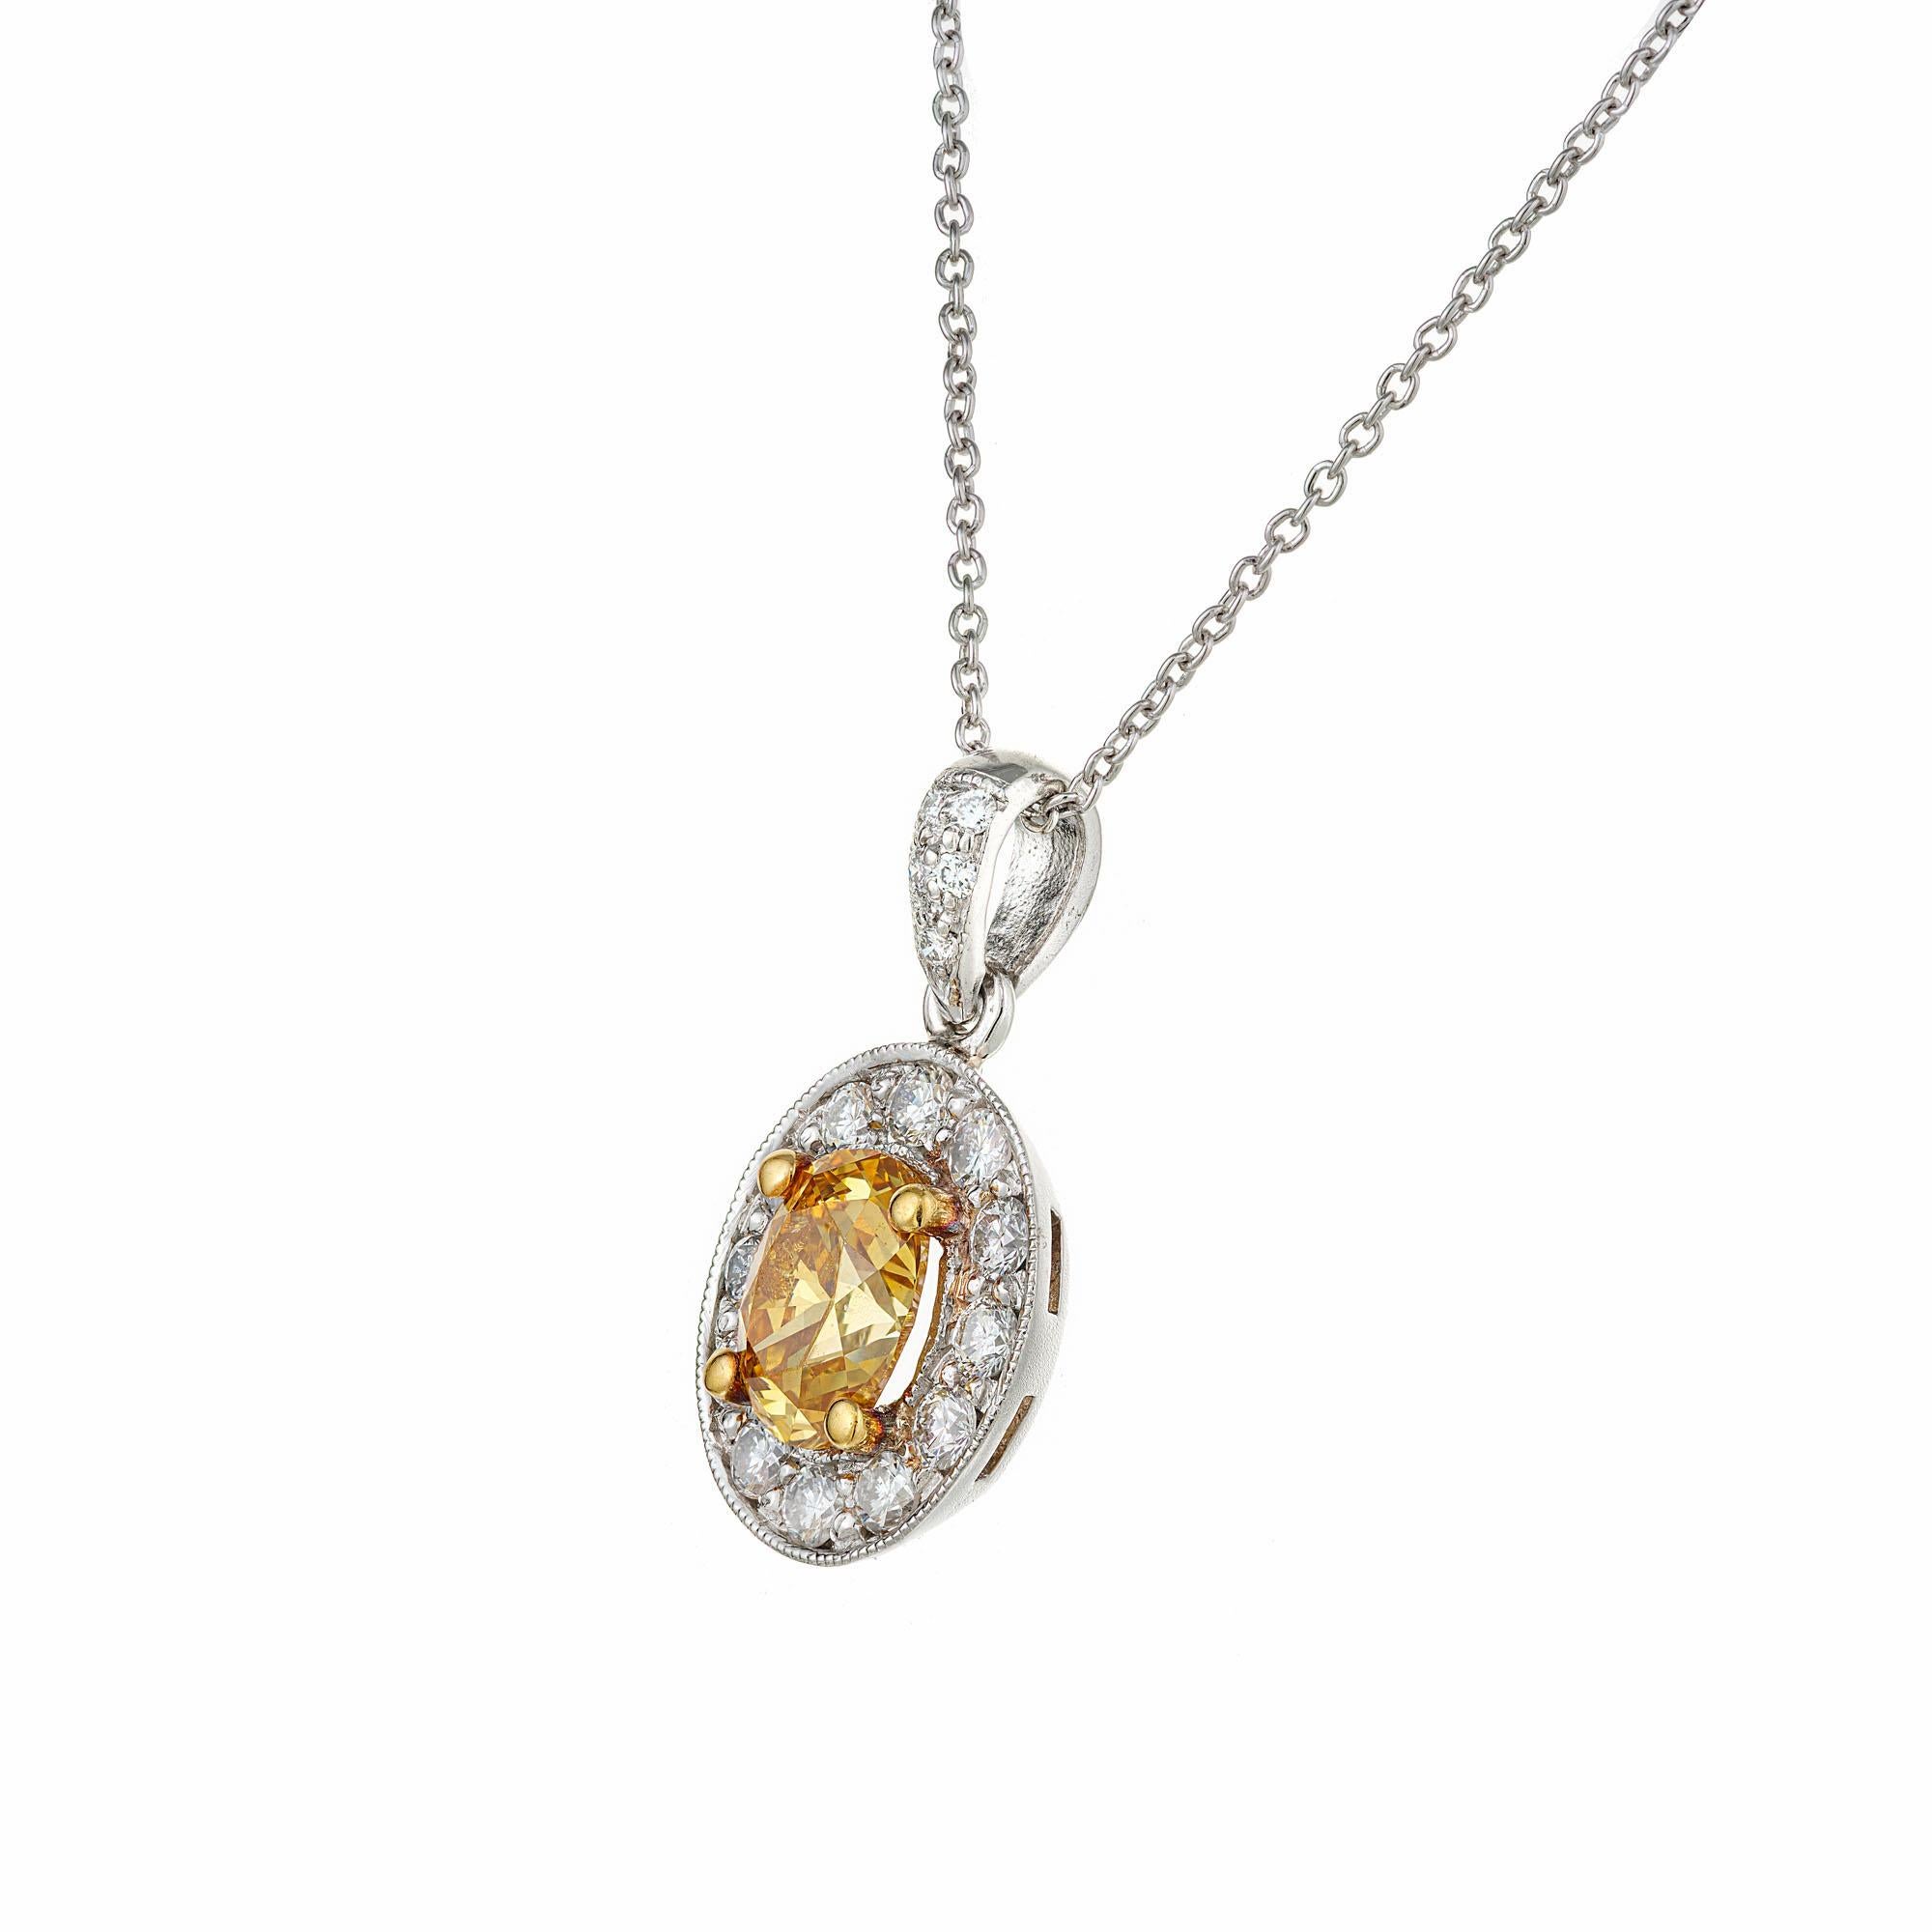 Natural fancy intense oval orange-yellow diamond pendant necklace. GIA certified natural fancy intense orange-yellow center diamond, set in platinum with a halo of 12 round diamonds. 16 inch chain.  The setting is created in the Peter Suchy